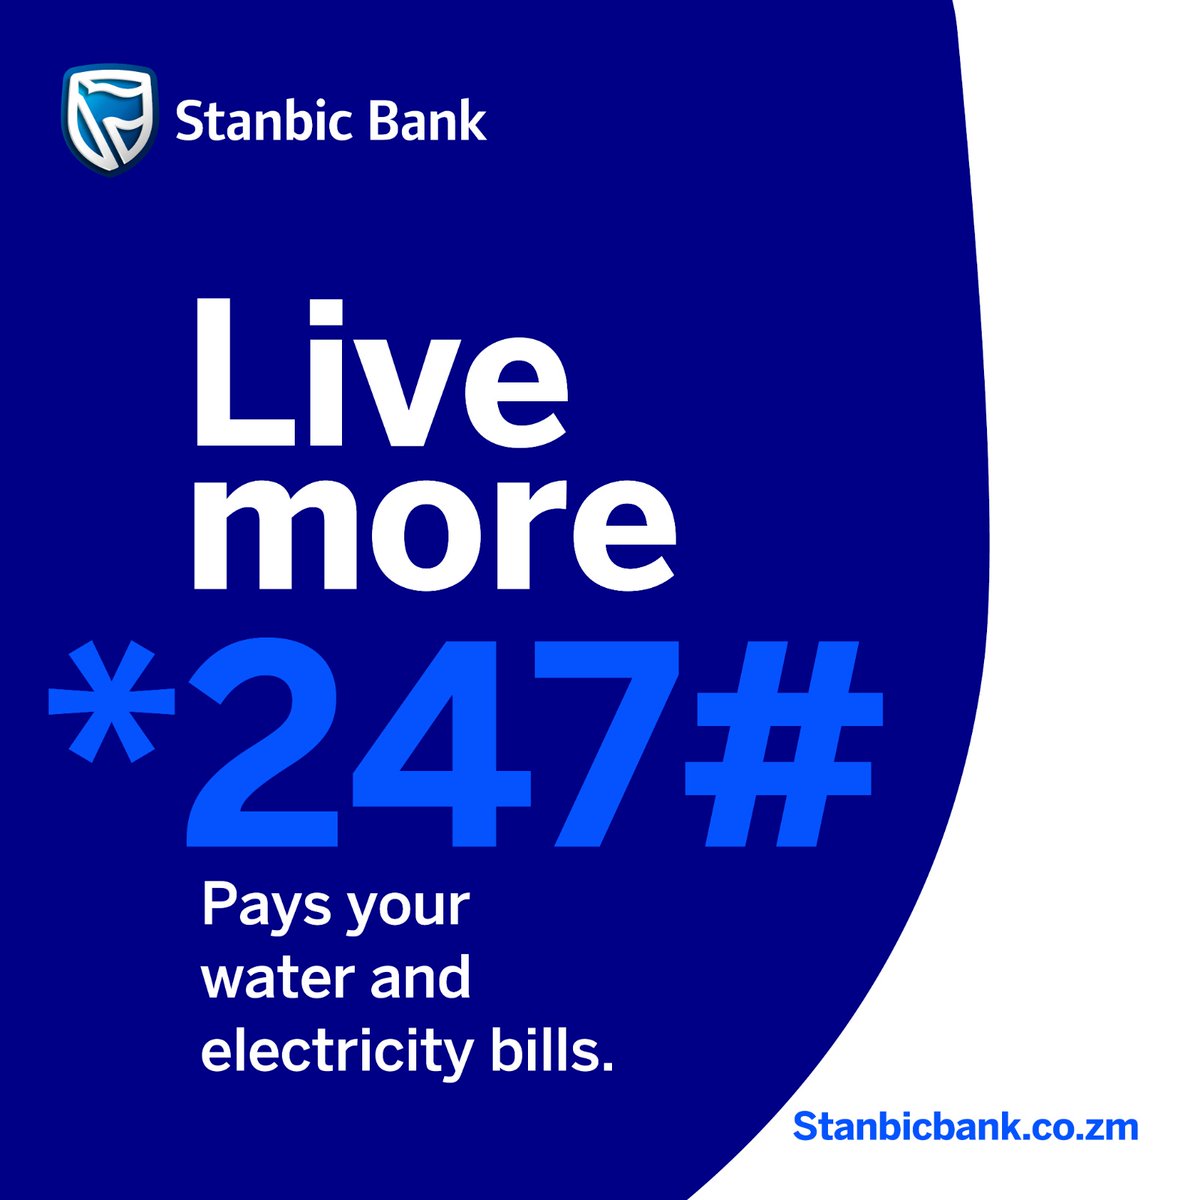 With Stanbic's Bank to Mobile service, you can buy electricity units or pay for your water bill straight from your bank account, ensuring your lights stay on and your water supply is not interrupted. Dial *247# and follow the prompts to stay powered up and connected!